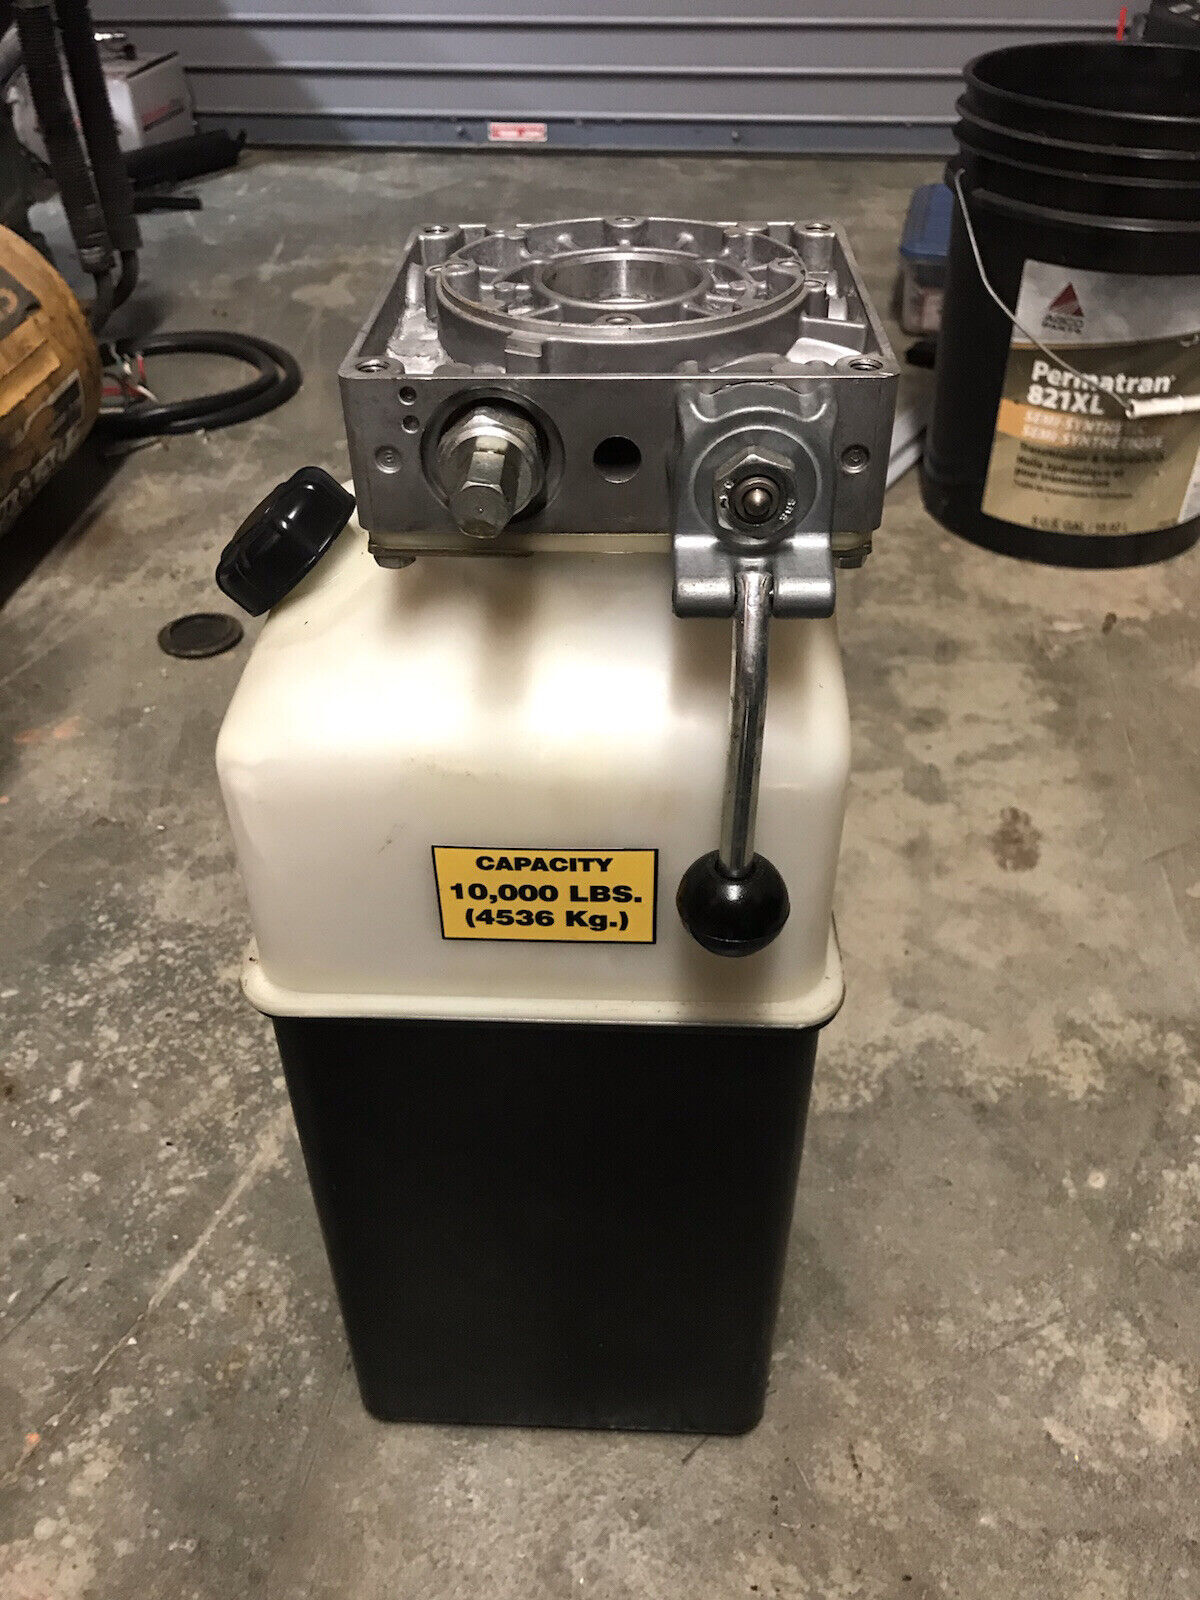 FORWARD-ROTARY LIFT GLOBAL HYDRAULICS POWER UNIT PUMP AND TANK 3.1GPM 2755 PSI